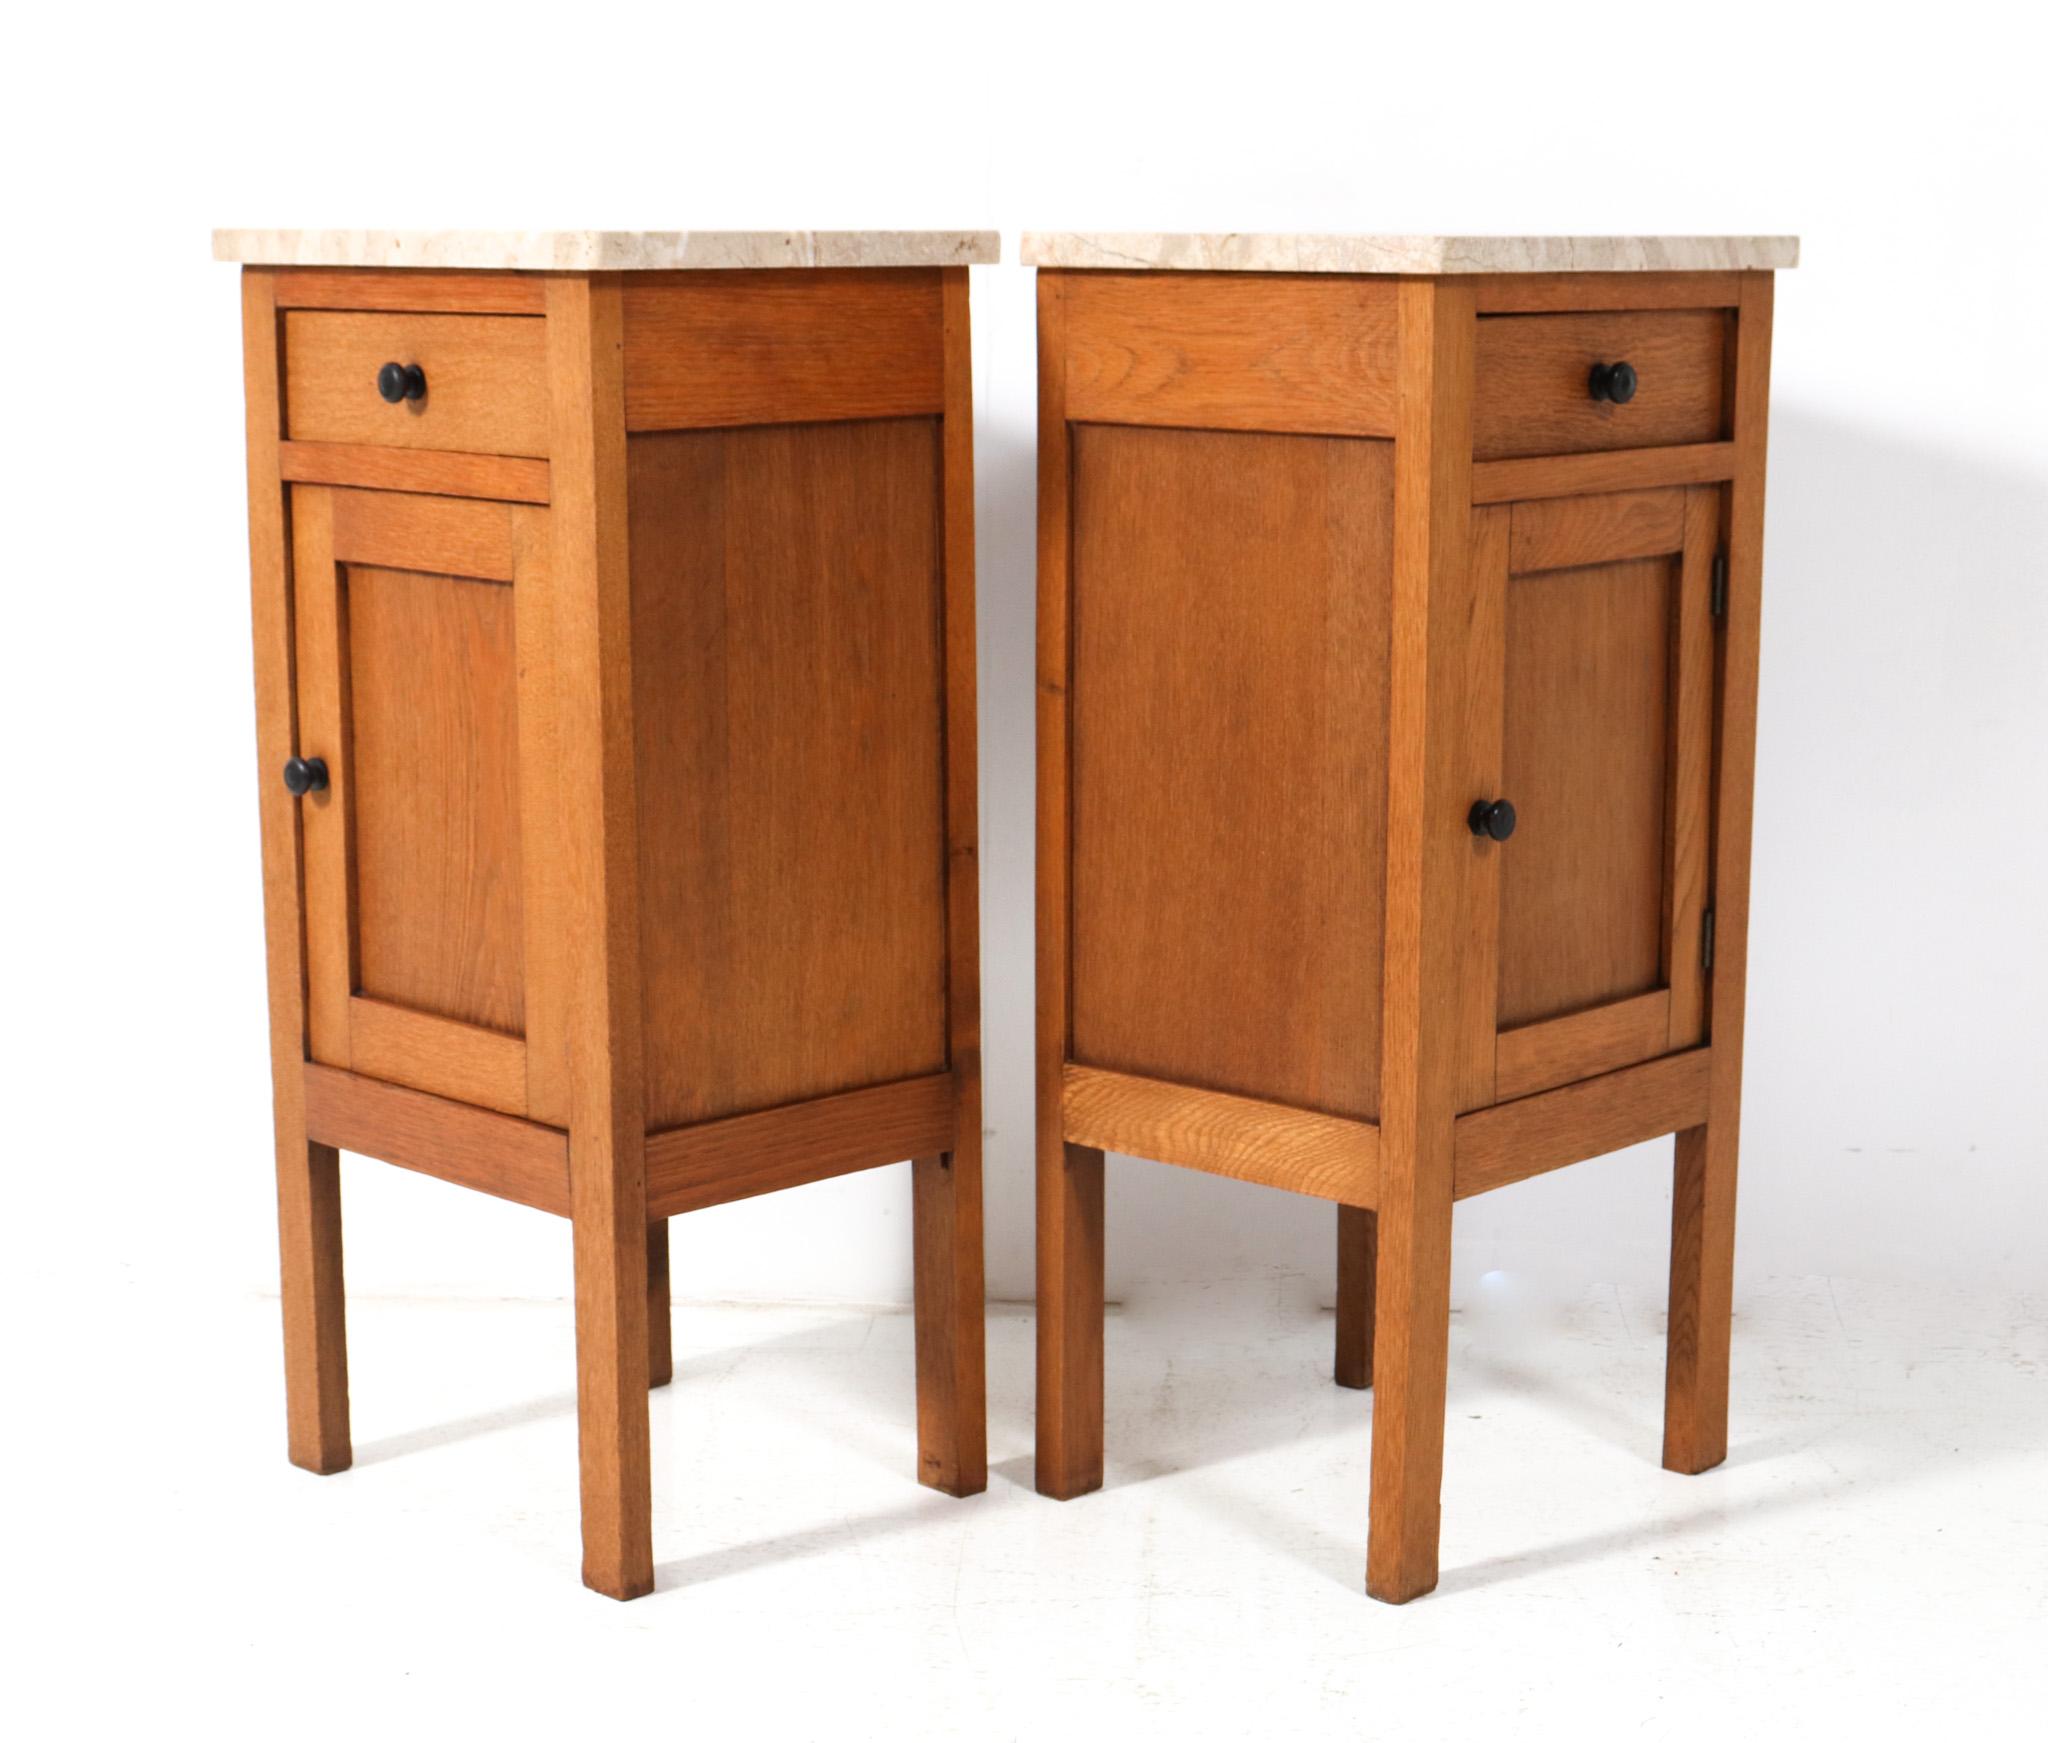 Two Oak Arts & Crafts Art Nouveau Nightstands or Bedside Tables, 1900s For Sale 1